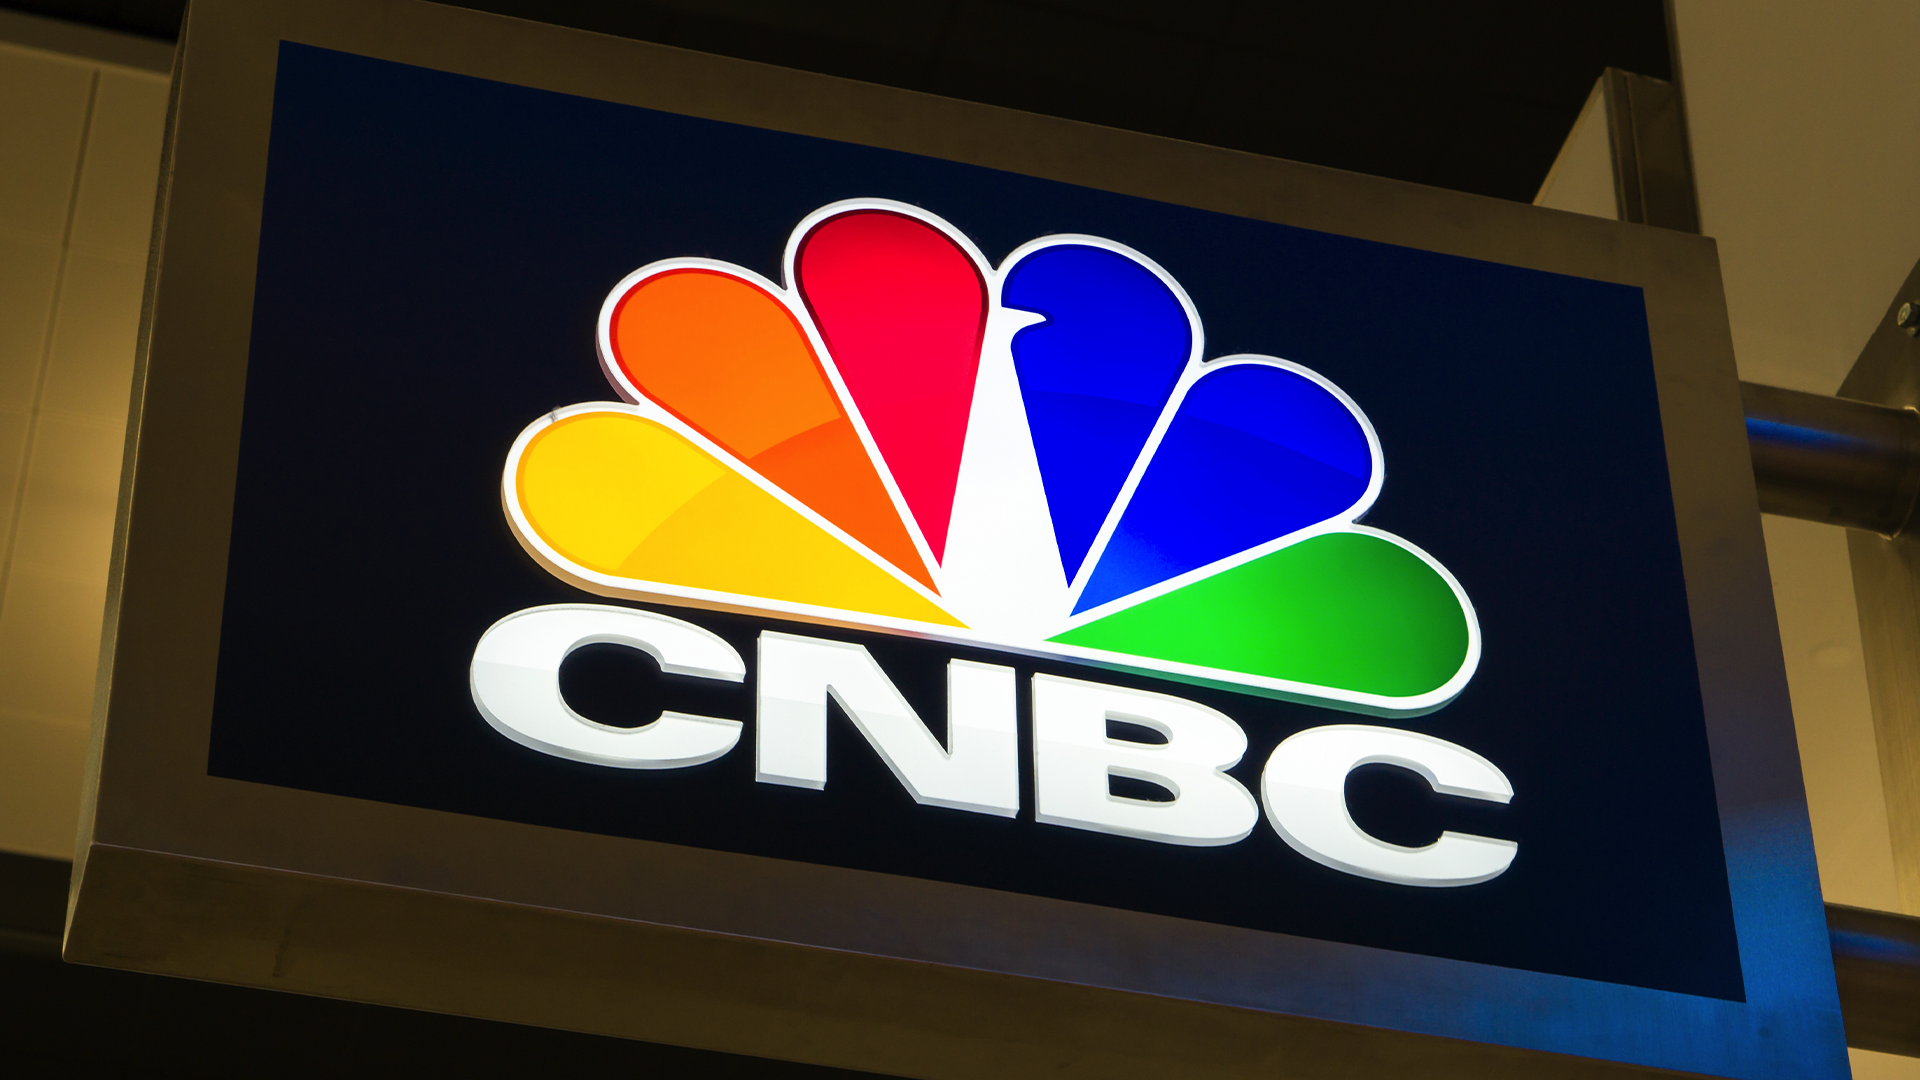 The CNBC logo on a big sign.